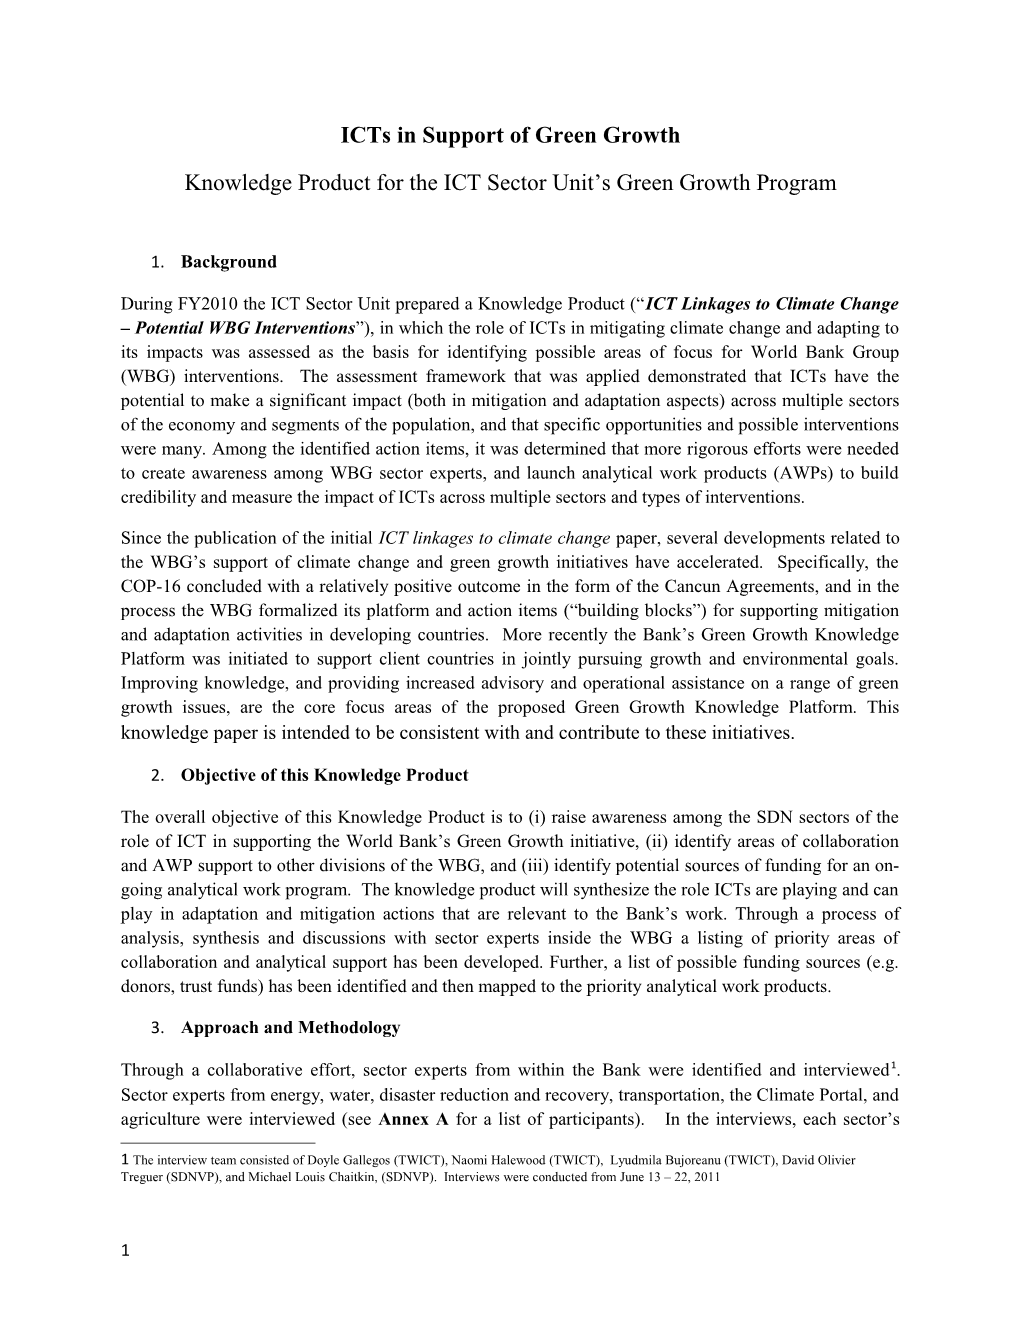 Knowledge Product for the ICT Sector Unit S Green Growth Program